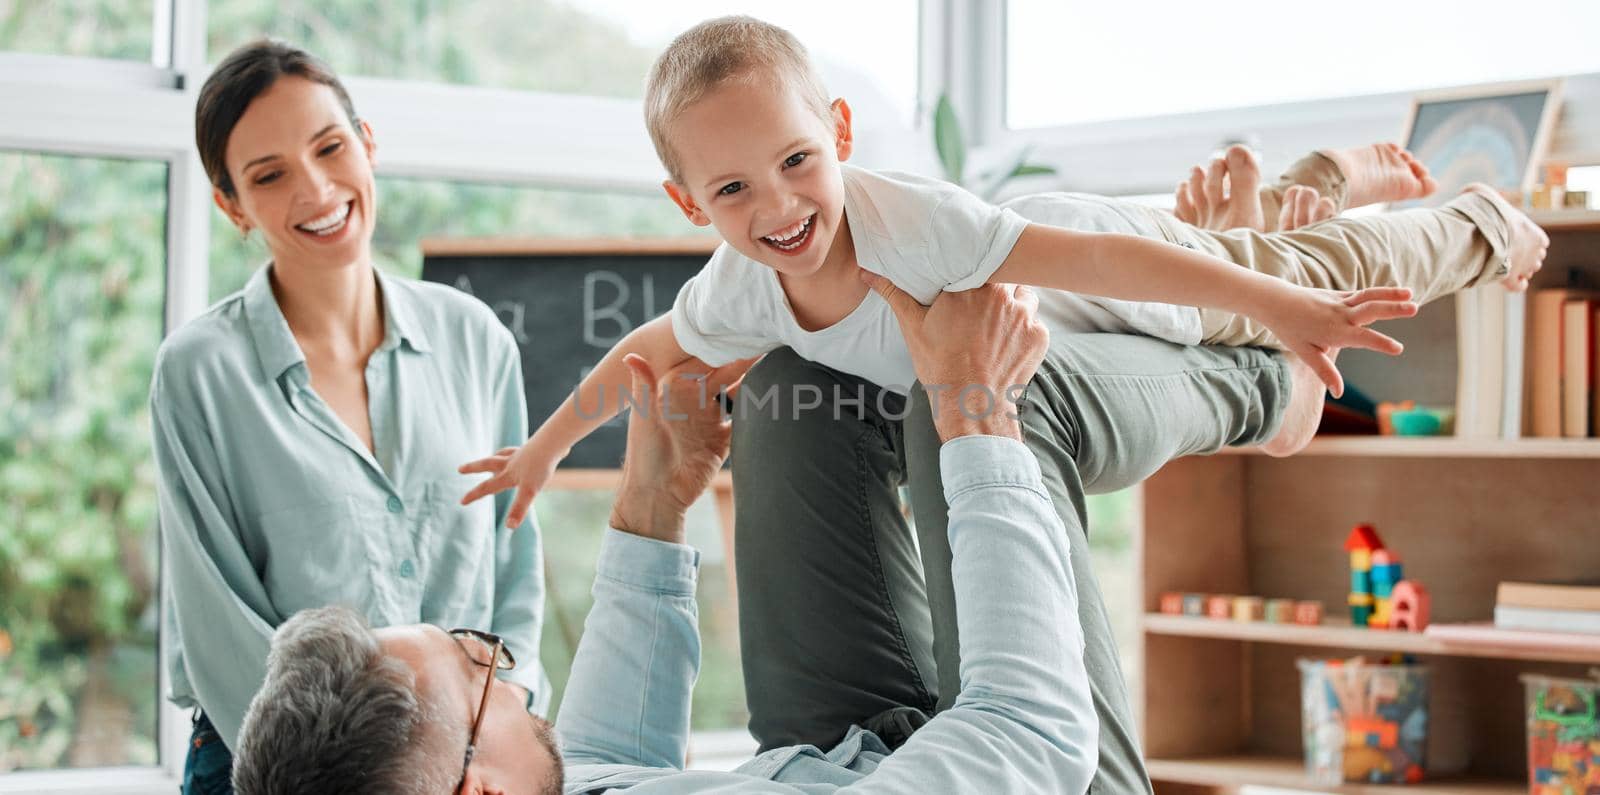 Whatever you call it, you need family. two parents playing with their son at home